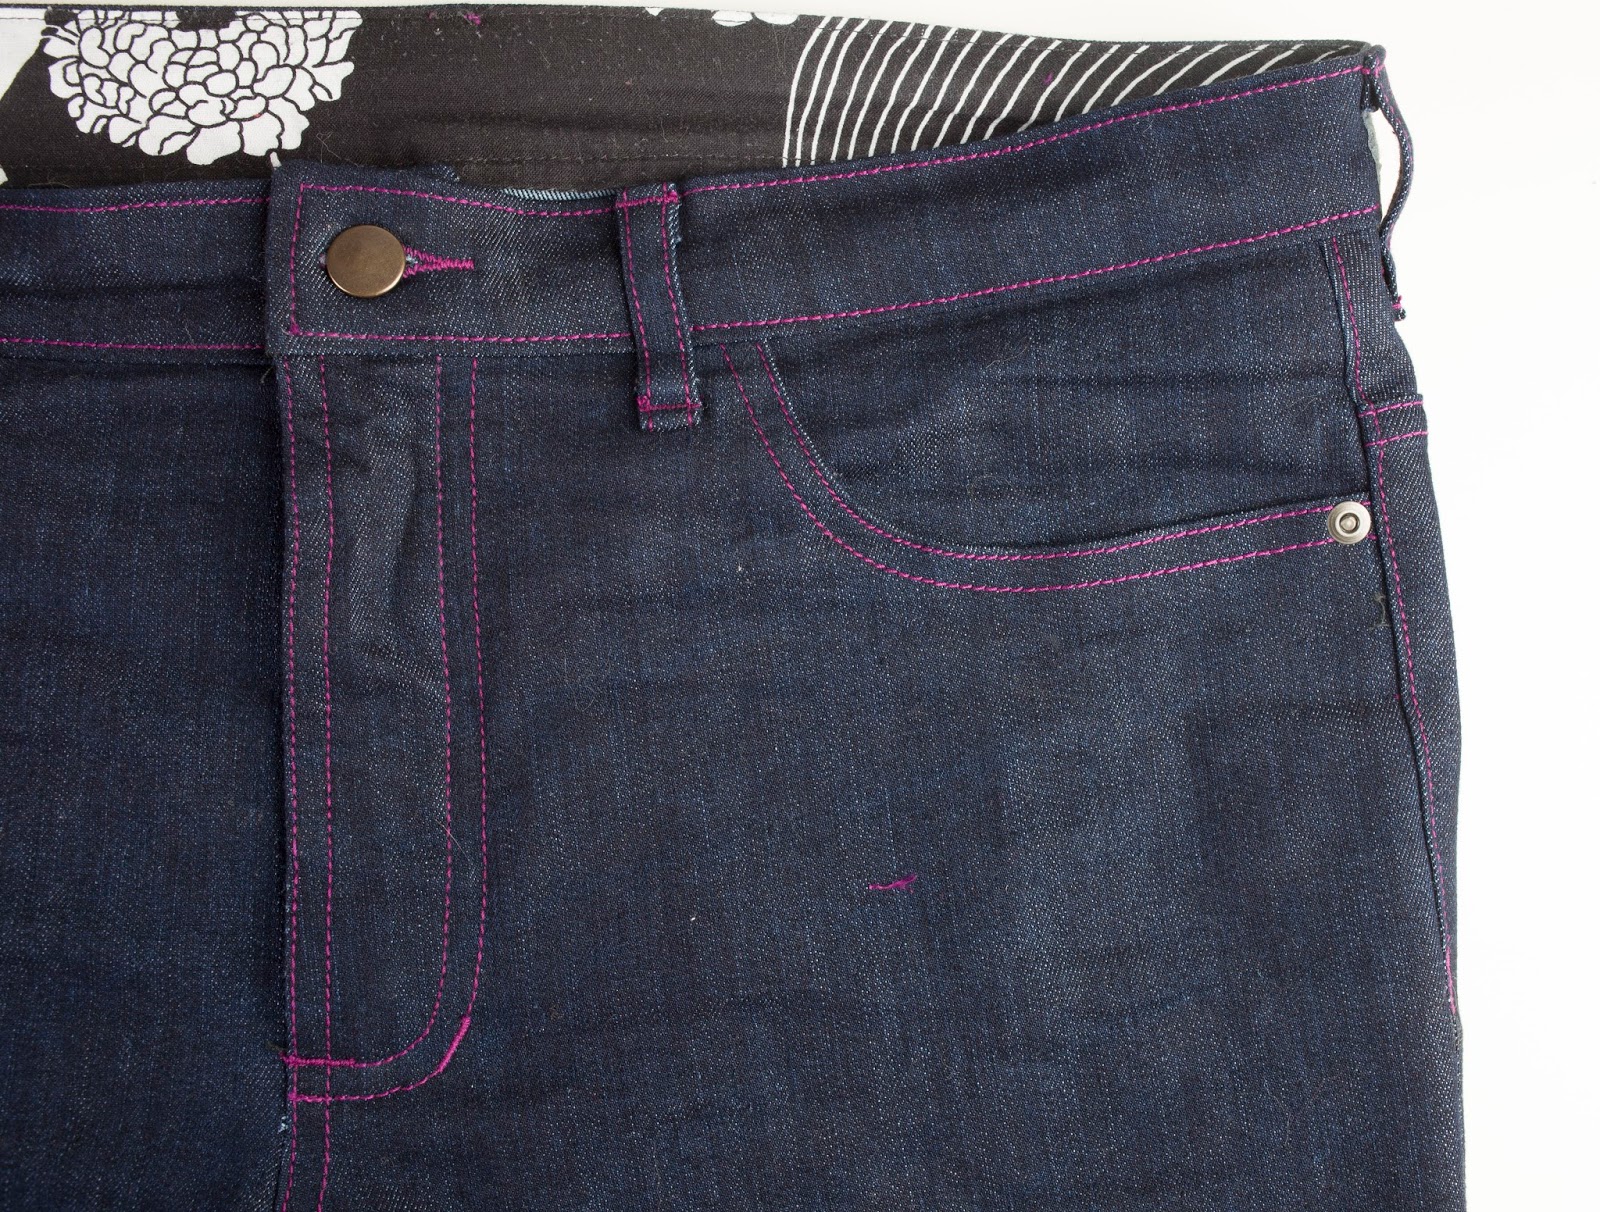 UNLIKELY: Ginger Jeans! Cone Mills Stretch Denim with Purple Topstitching